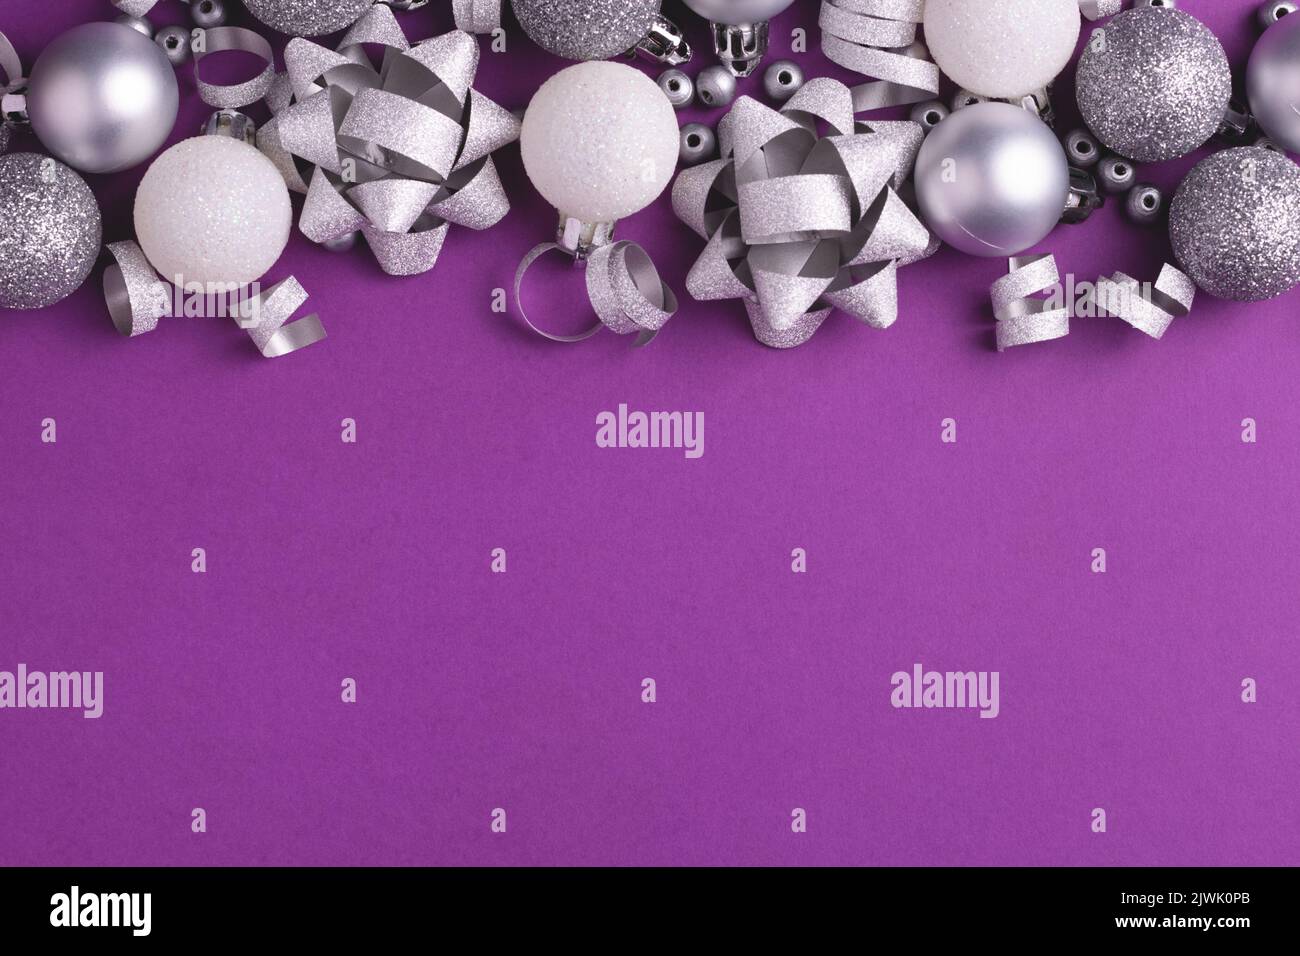 Holiday background with grey and white metallic decorations on purple. Copy space. Christmas and New Year. Stock Photo